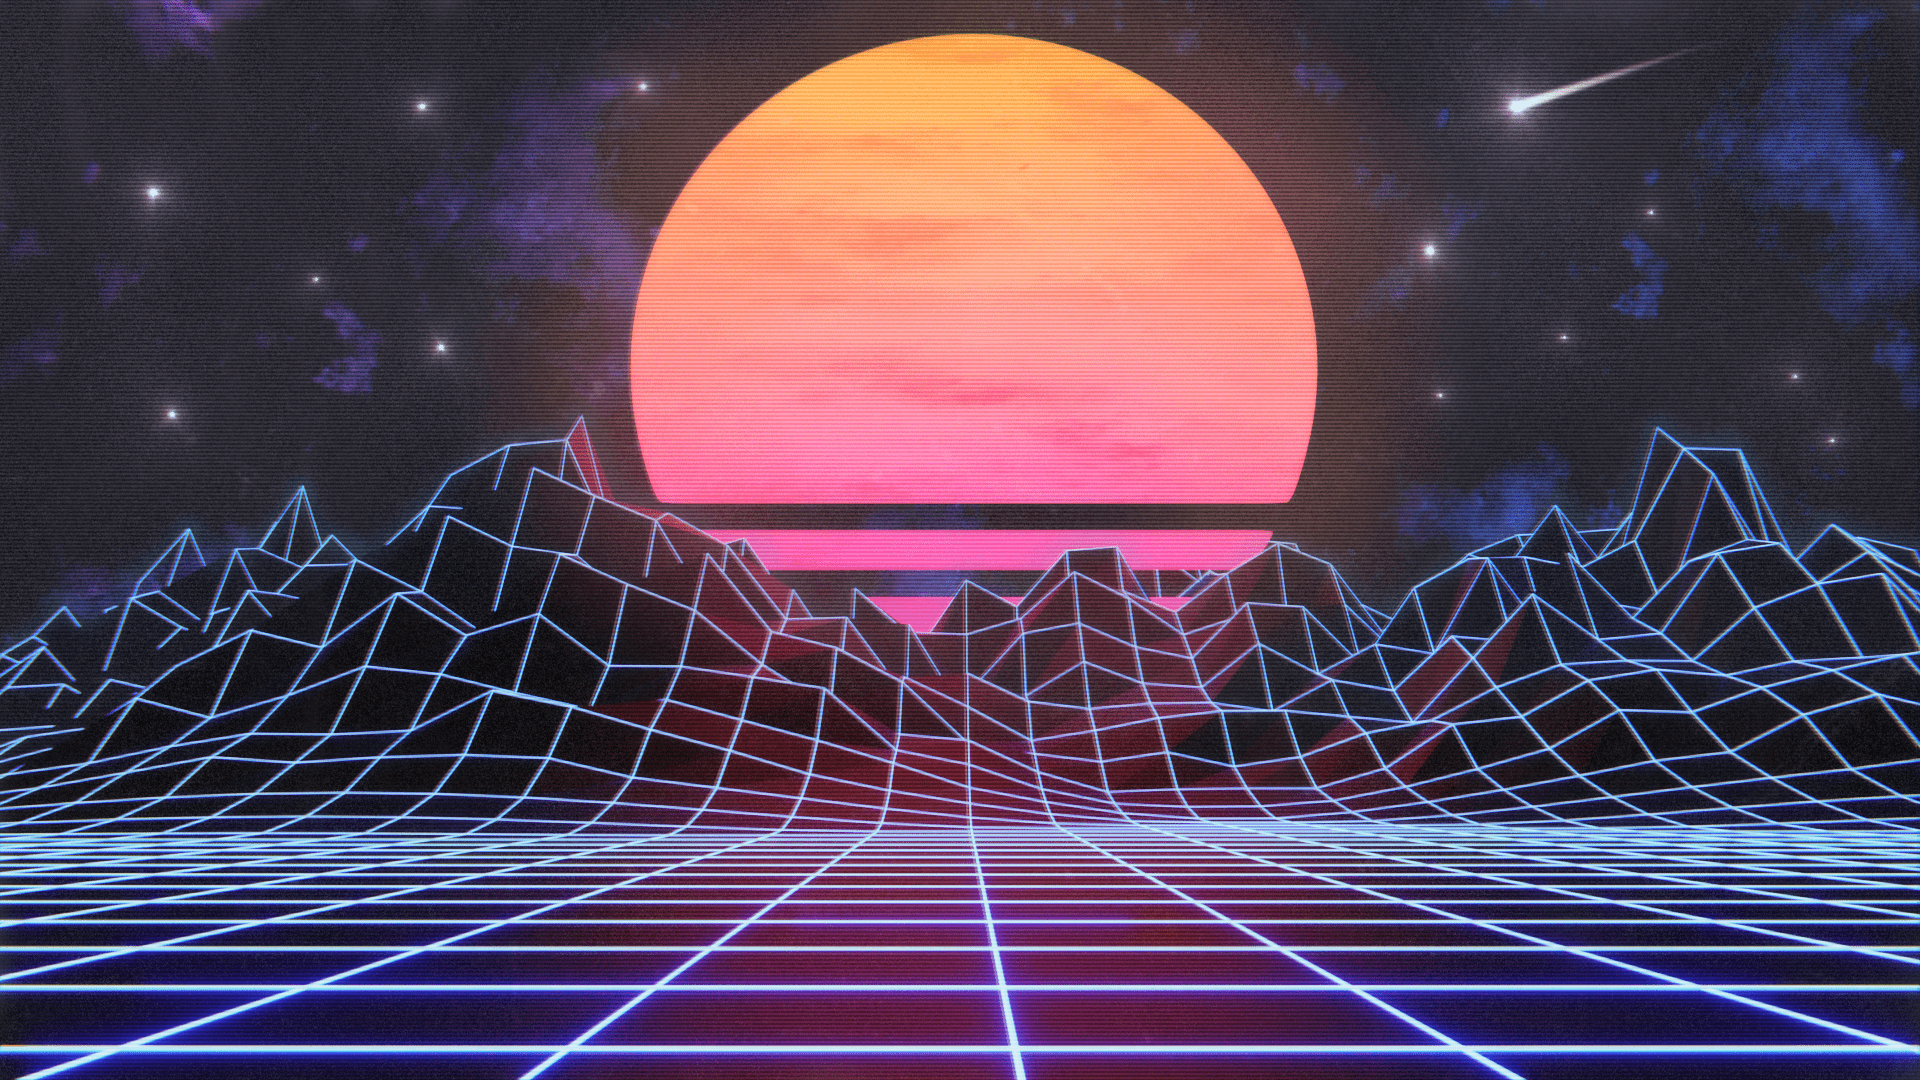 Thrown In The 80's. Aesthetic background, Synthwave art, Synthwave